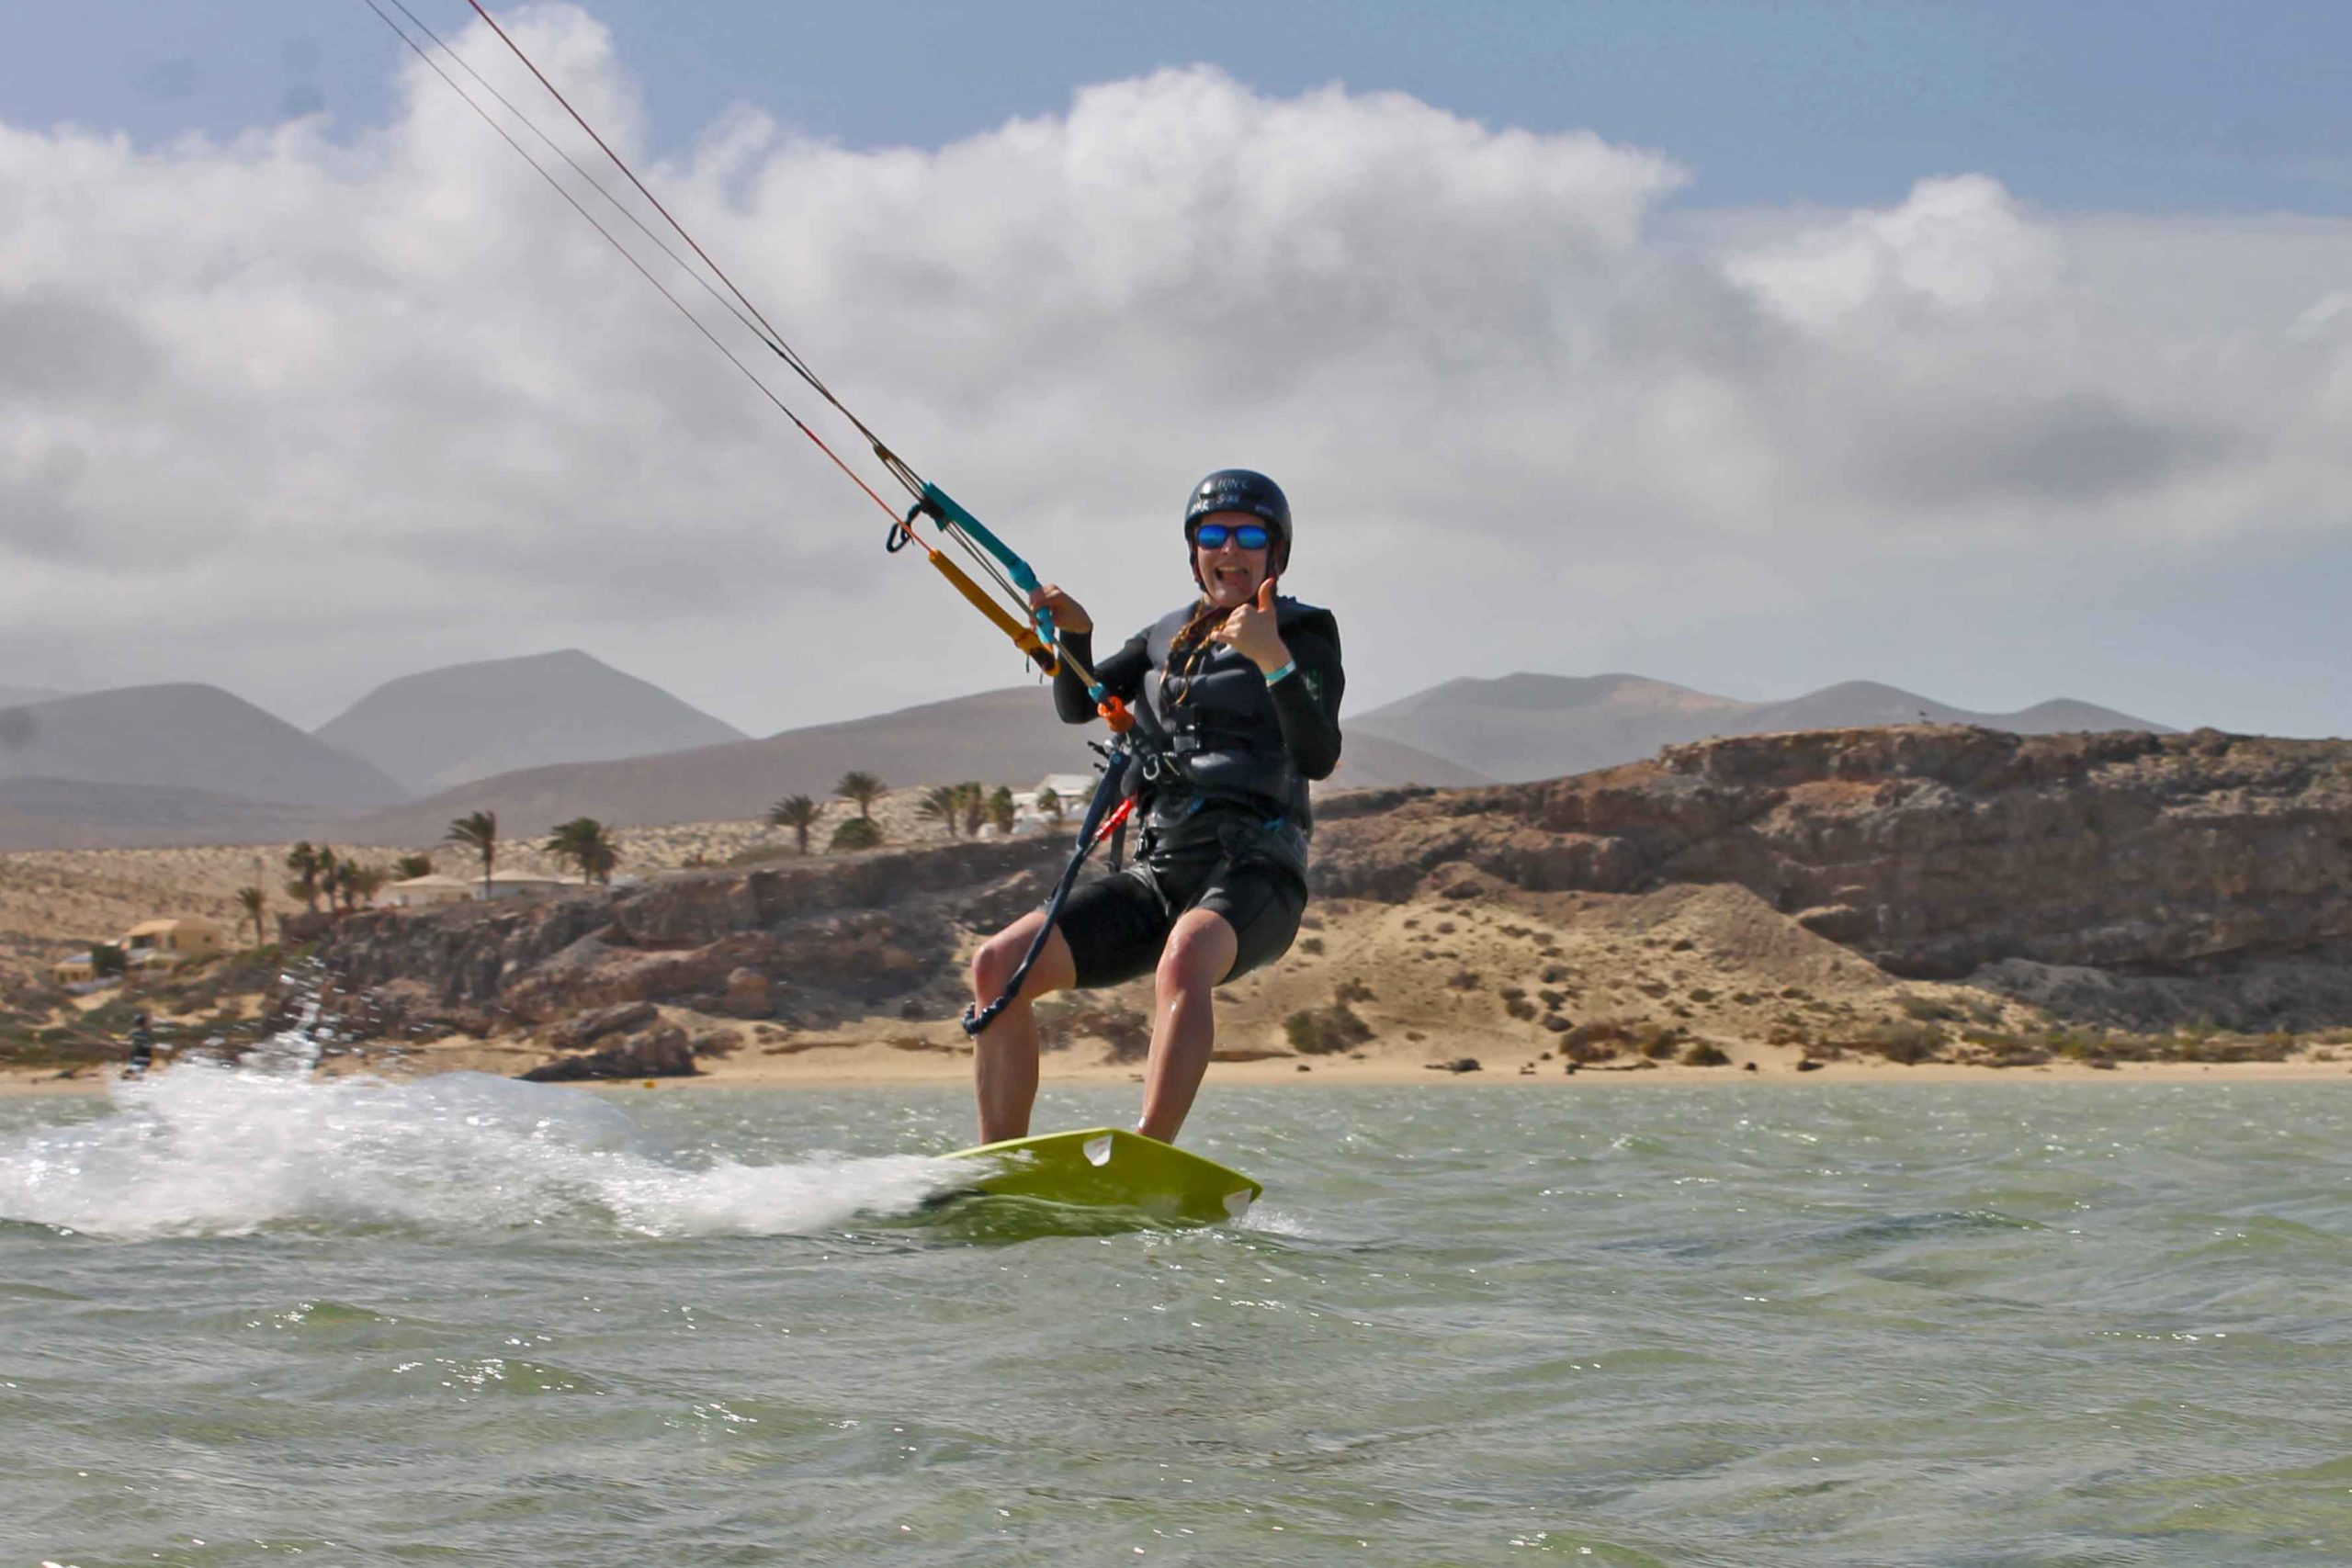 A happy guest learn Kitesurf on the spot in front of the ION CLUB Risco de Paso